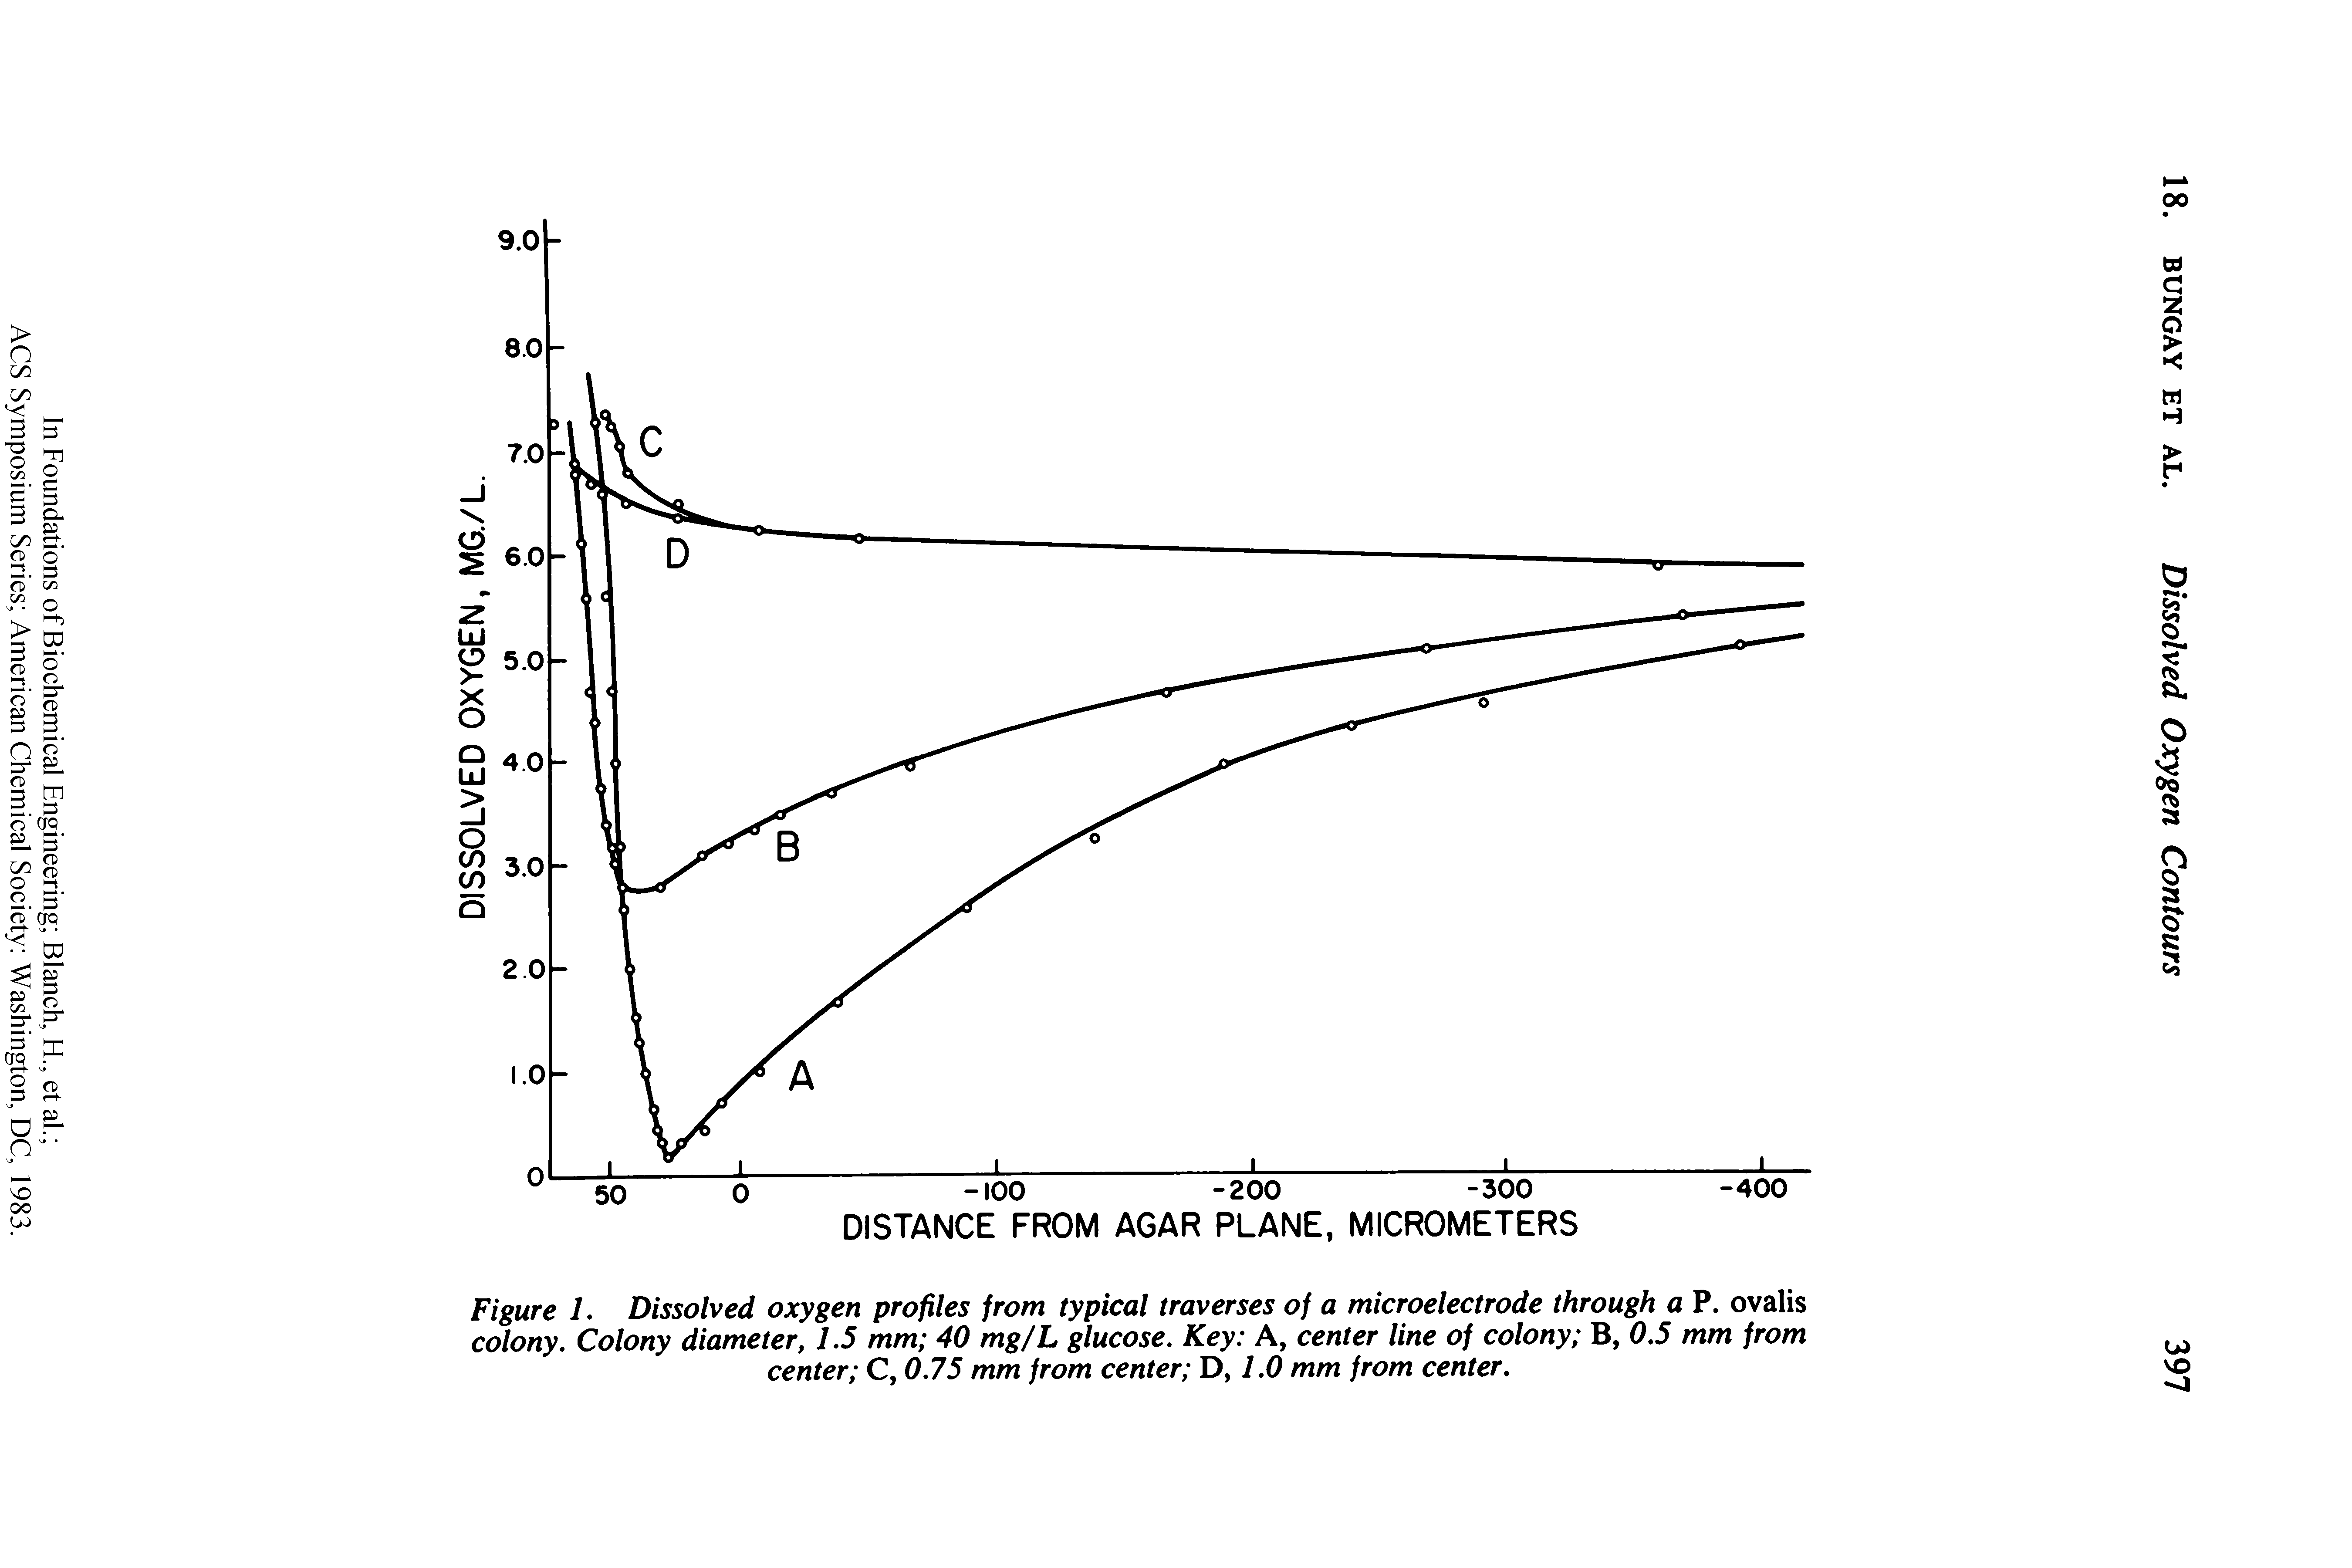 Figure 1, Dissolved oxygen profiles from typical traverses of a microelectrode through a P. ovalis colony. Colony diameter, 1.5 mm 40 mg/L glucose. Key A, center line of colony B, 0.5 mm from center C, 0.75 mm from center D, 1.0 mm from center.